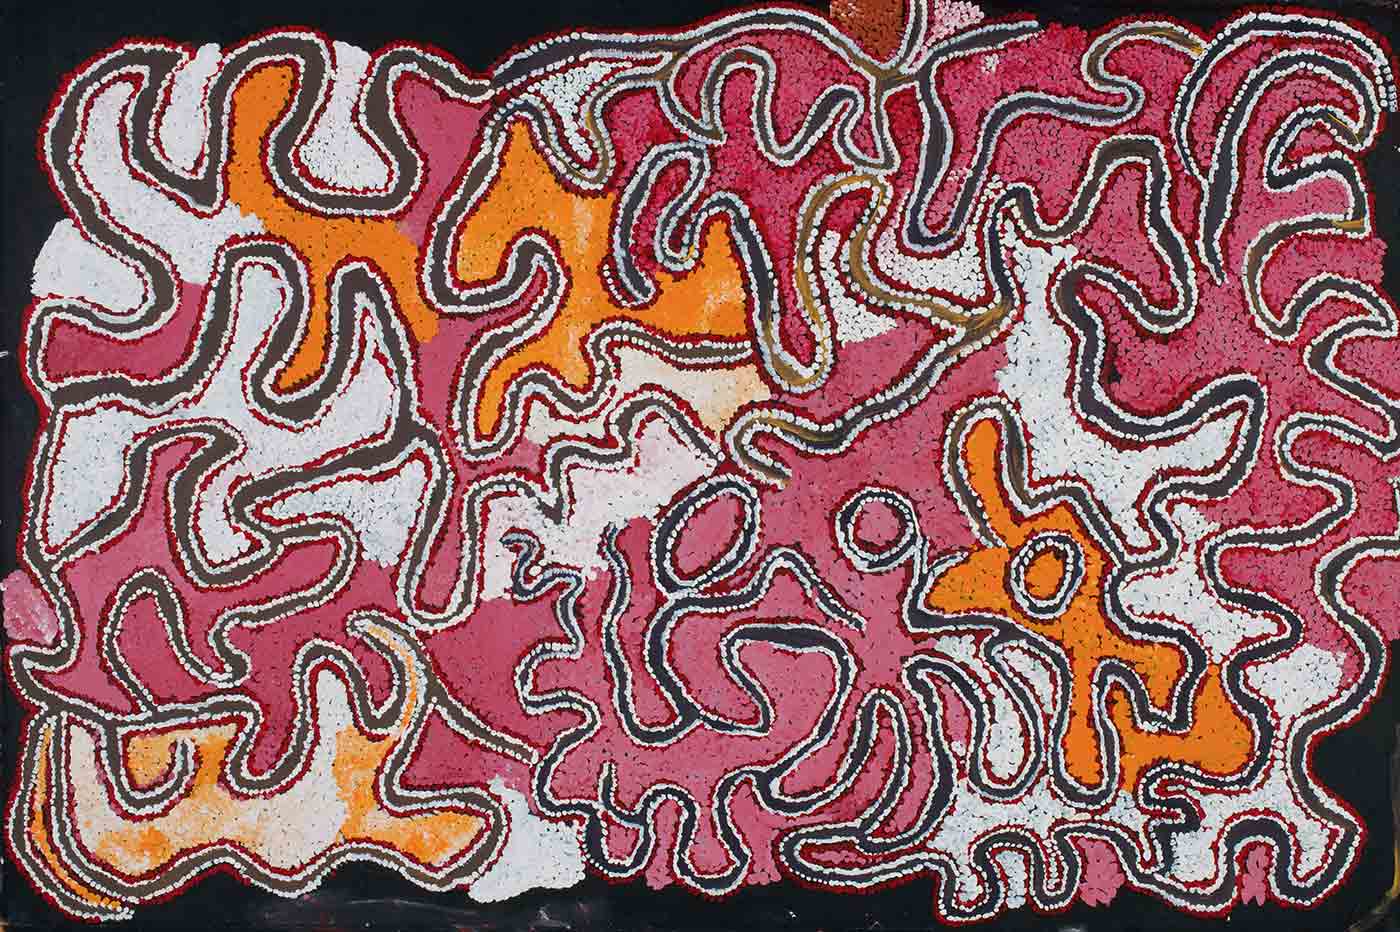 A painting on brown linen of interlocking deeply curved shapes in pink and dark pink dots, with some orange and pale pink dot filled shapes. The shapes are edged with lines of white and red dots and have a narrow line of black between them. There are two orange shapes towards the top centre, an apricot shape in the lower left and an orange shape at the lower right corner. Some of the black lines have an overlay of translucent yellow.